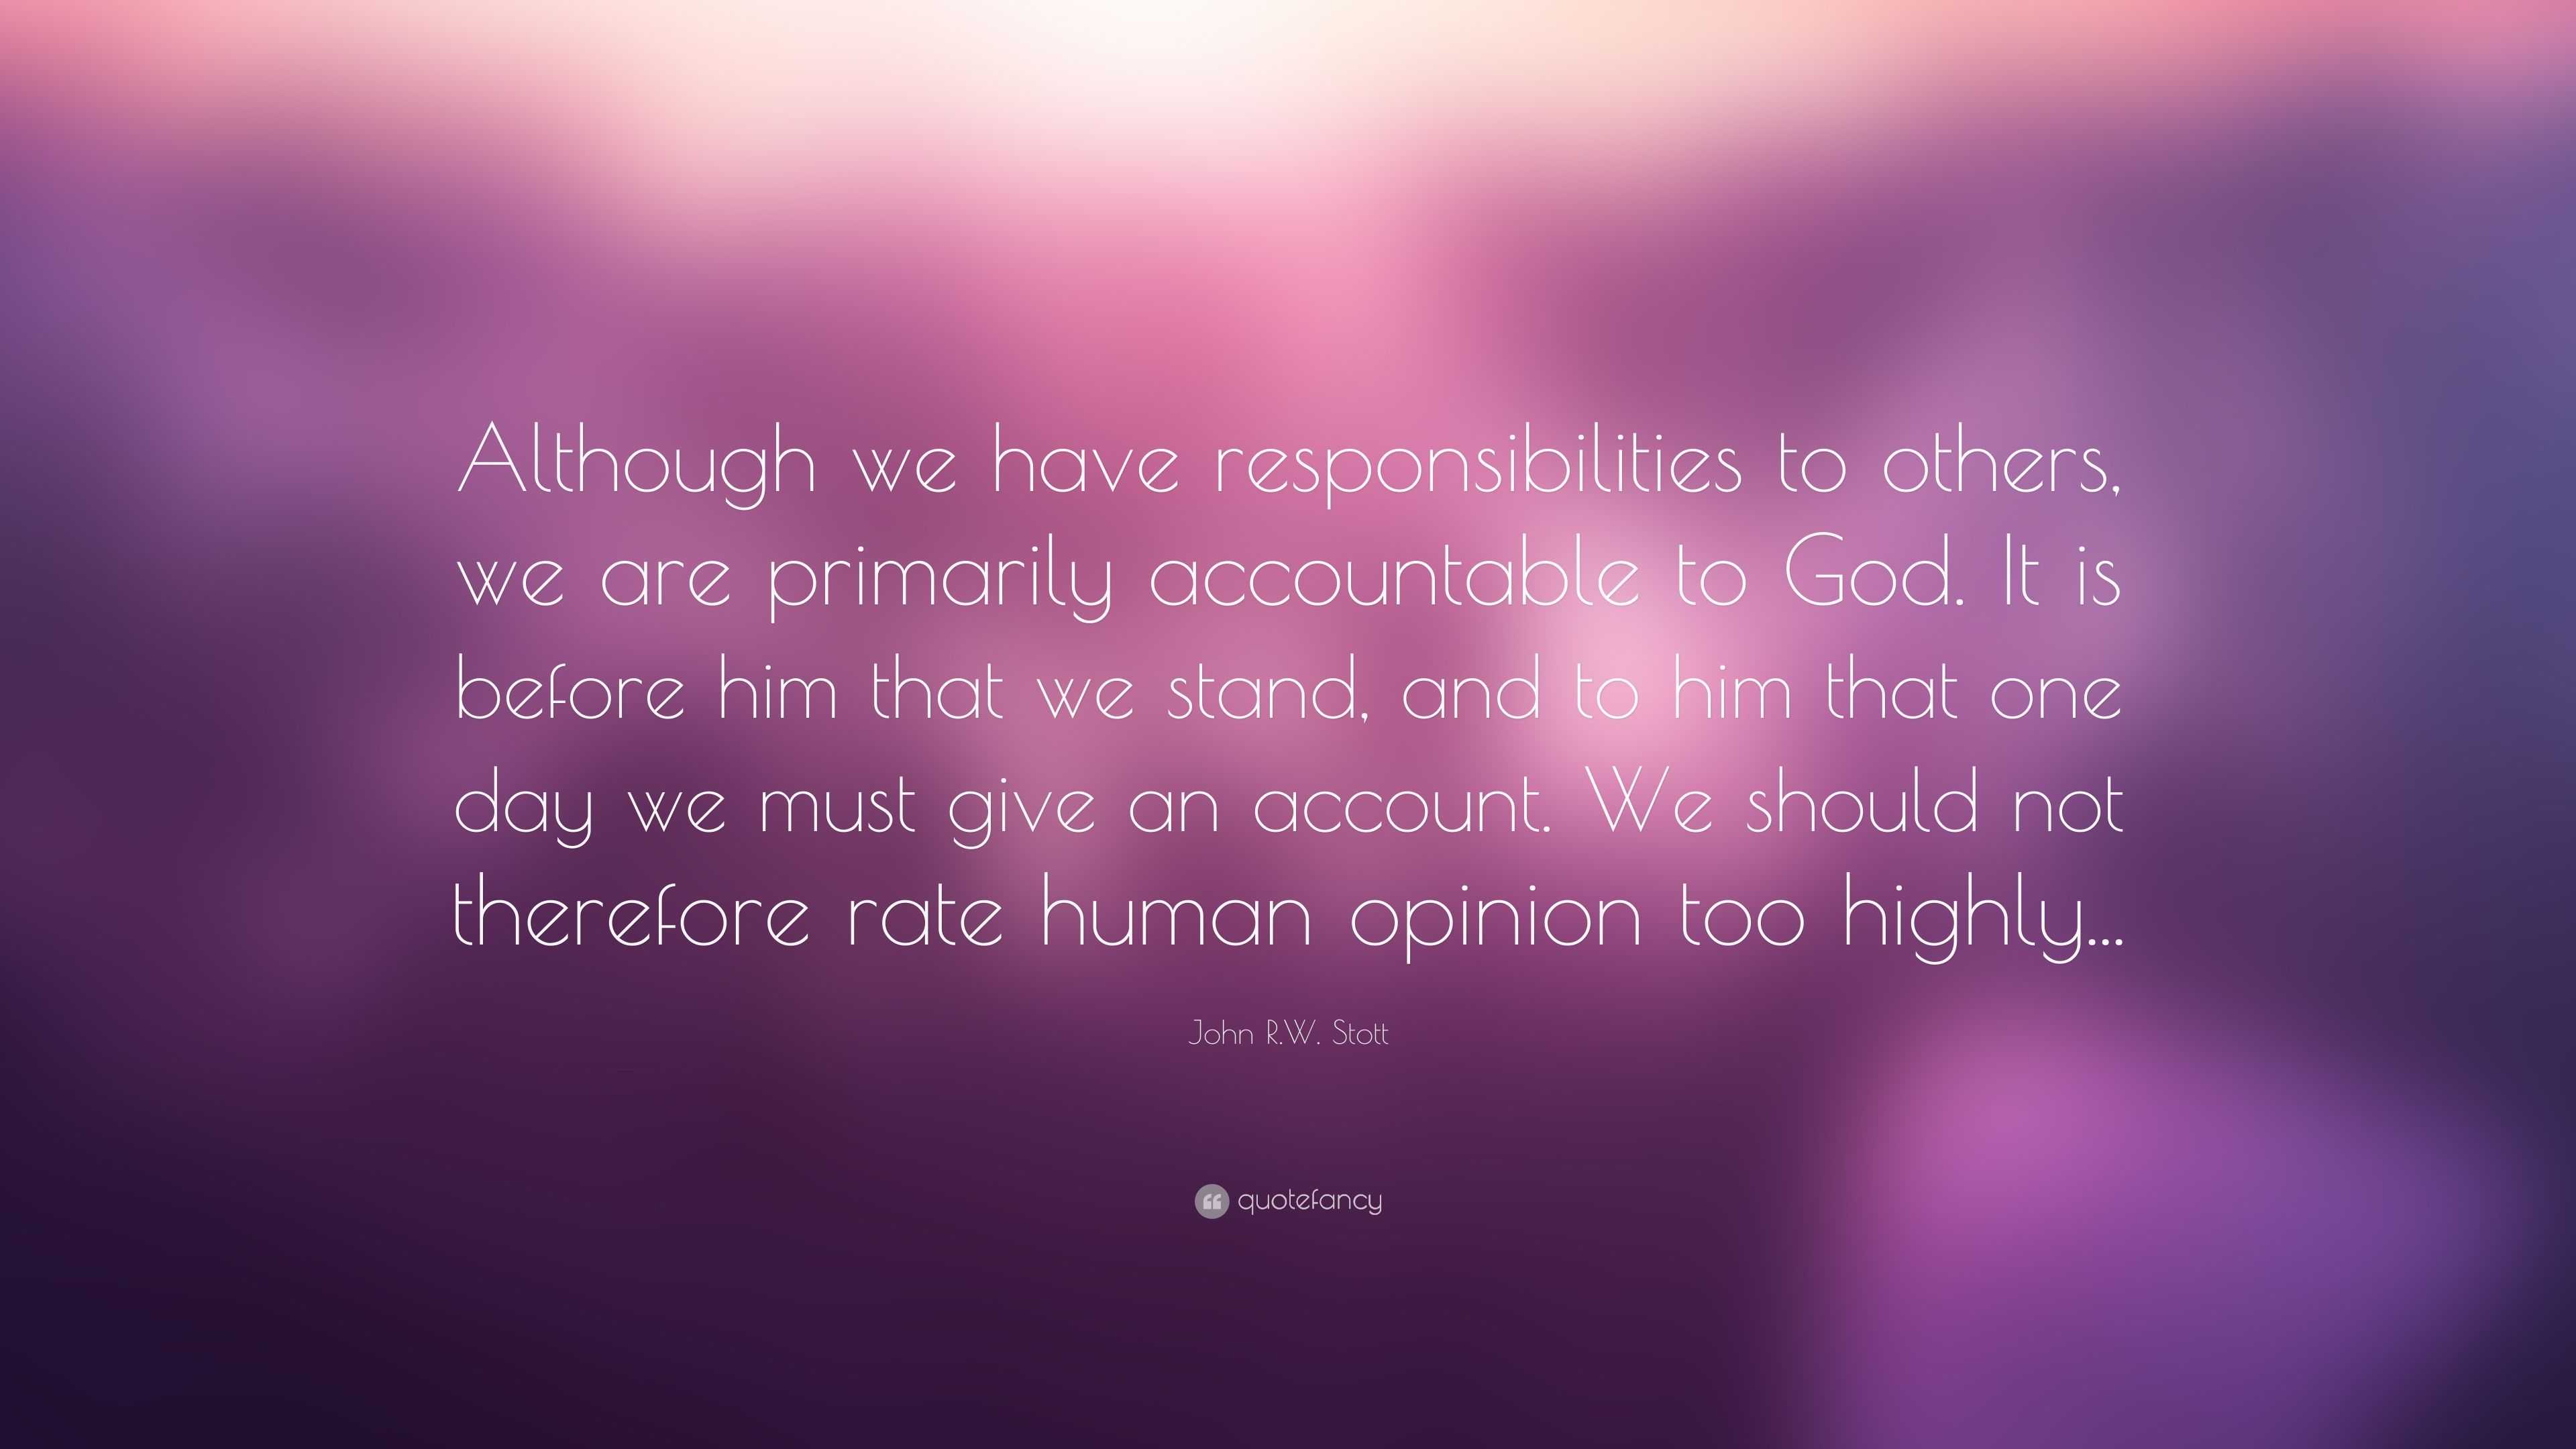 John R.W. Stott Quote: “Although we have responsibilities to others, we ...